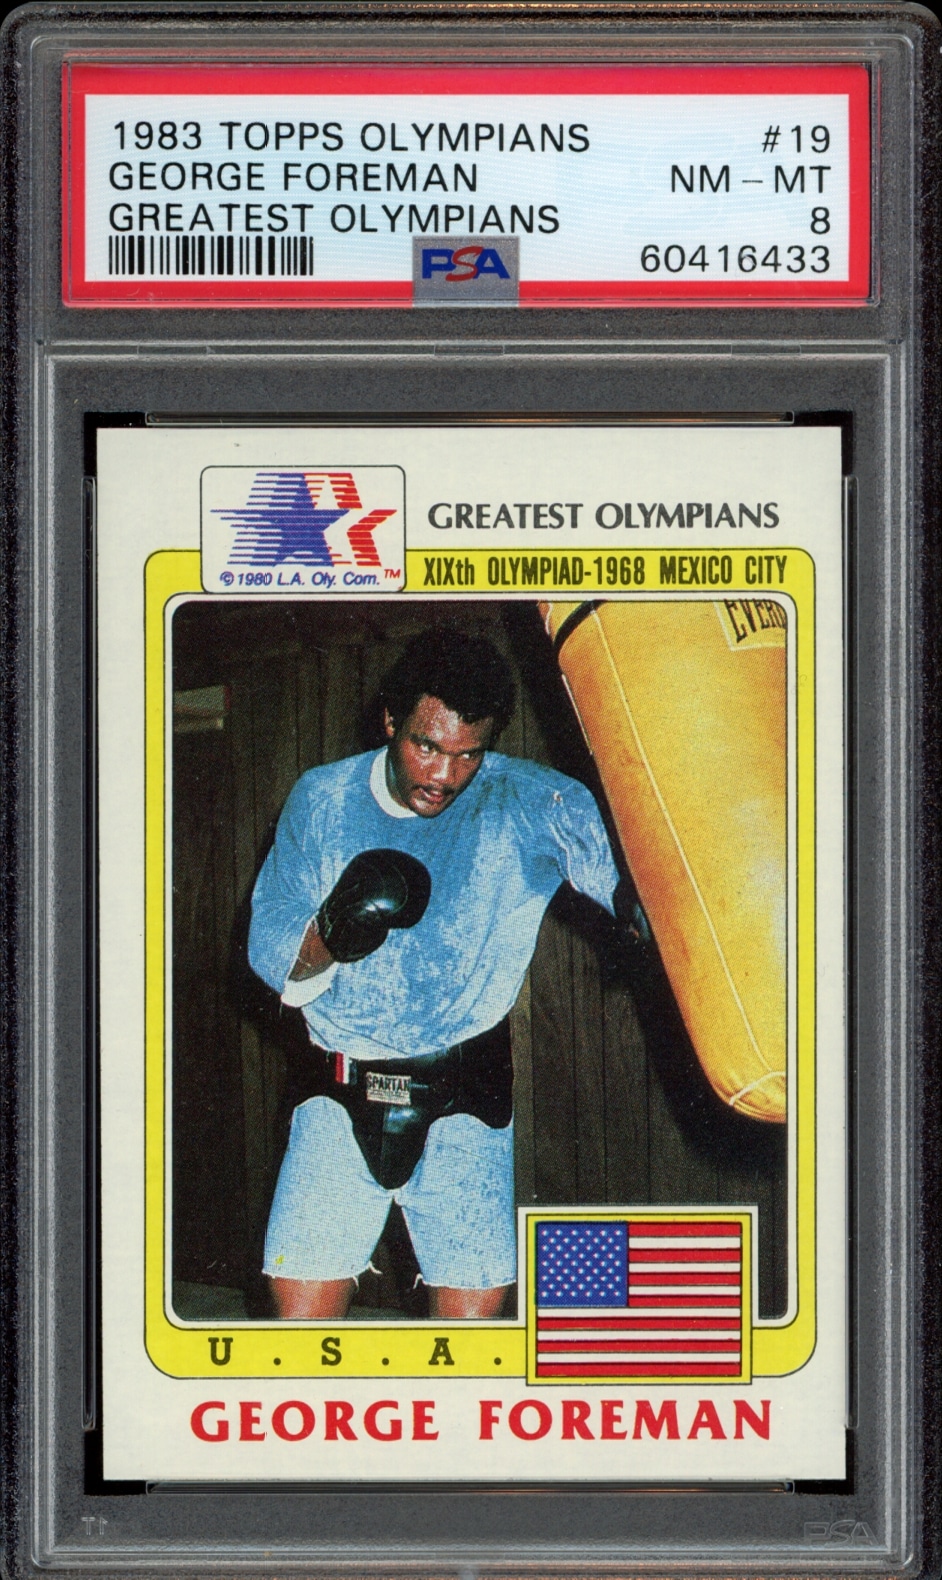 George Foreman 1983 Topps Olympians card, graded PSA 8, showcasing Olympic boxing excellence.